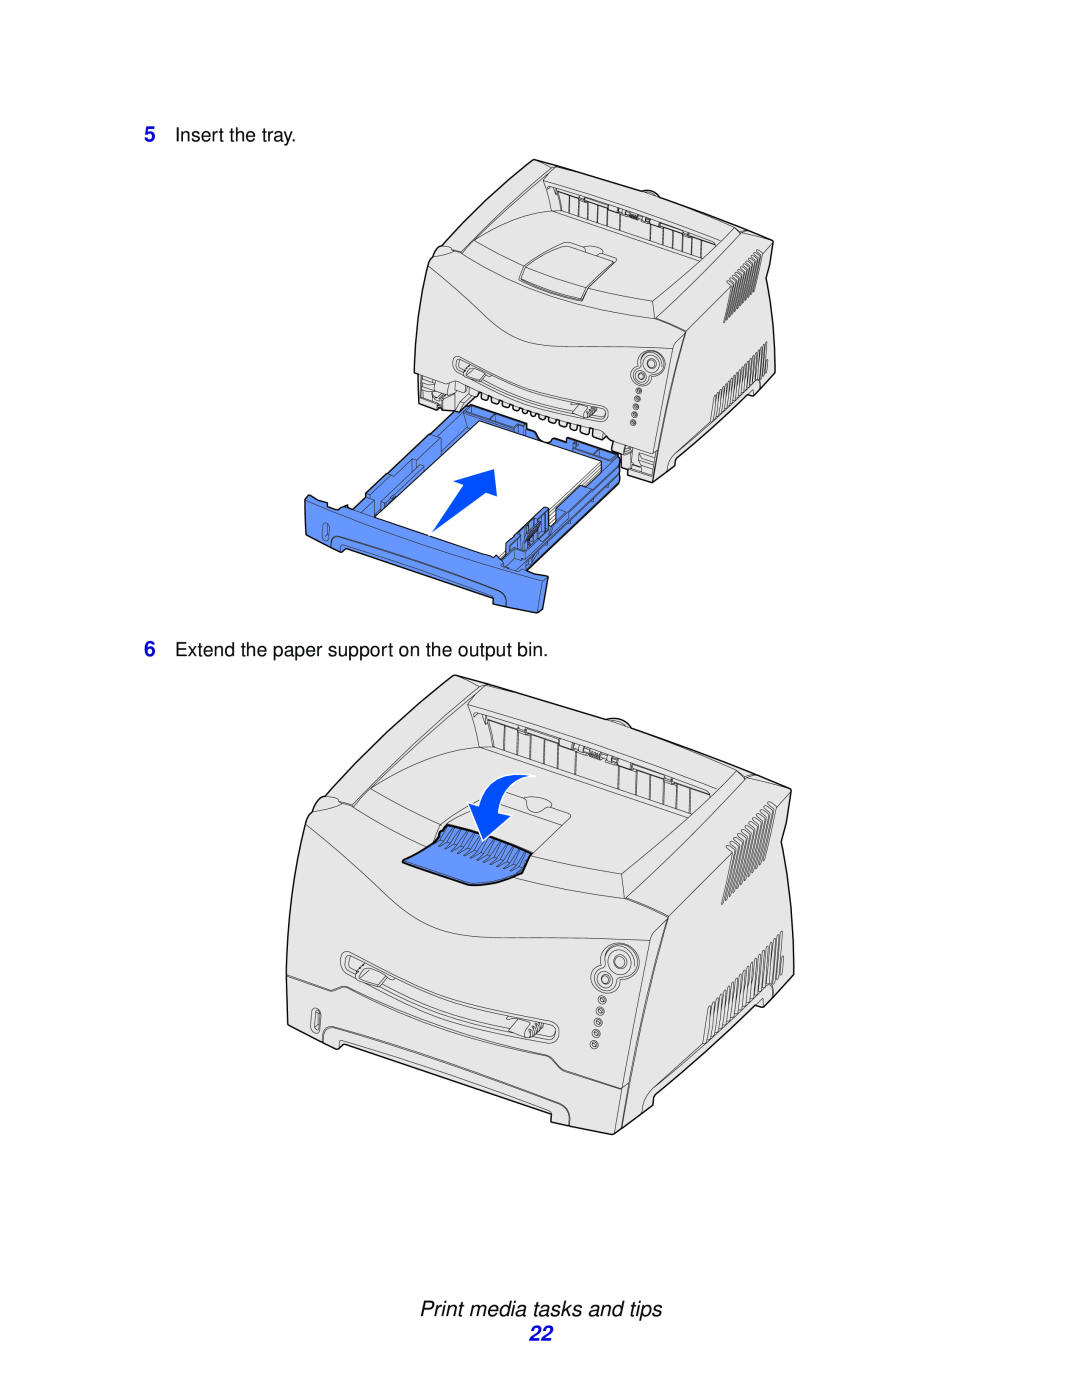 Lexmark E332n, 232, 230 manual Print media tasks and tips, Insert the tray 6 Extend the paper support on the output bin 